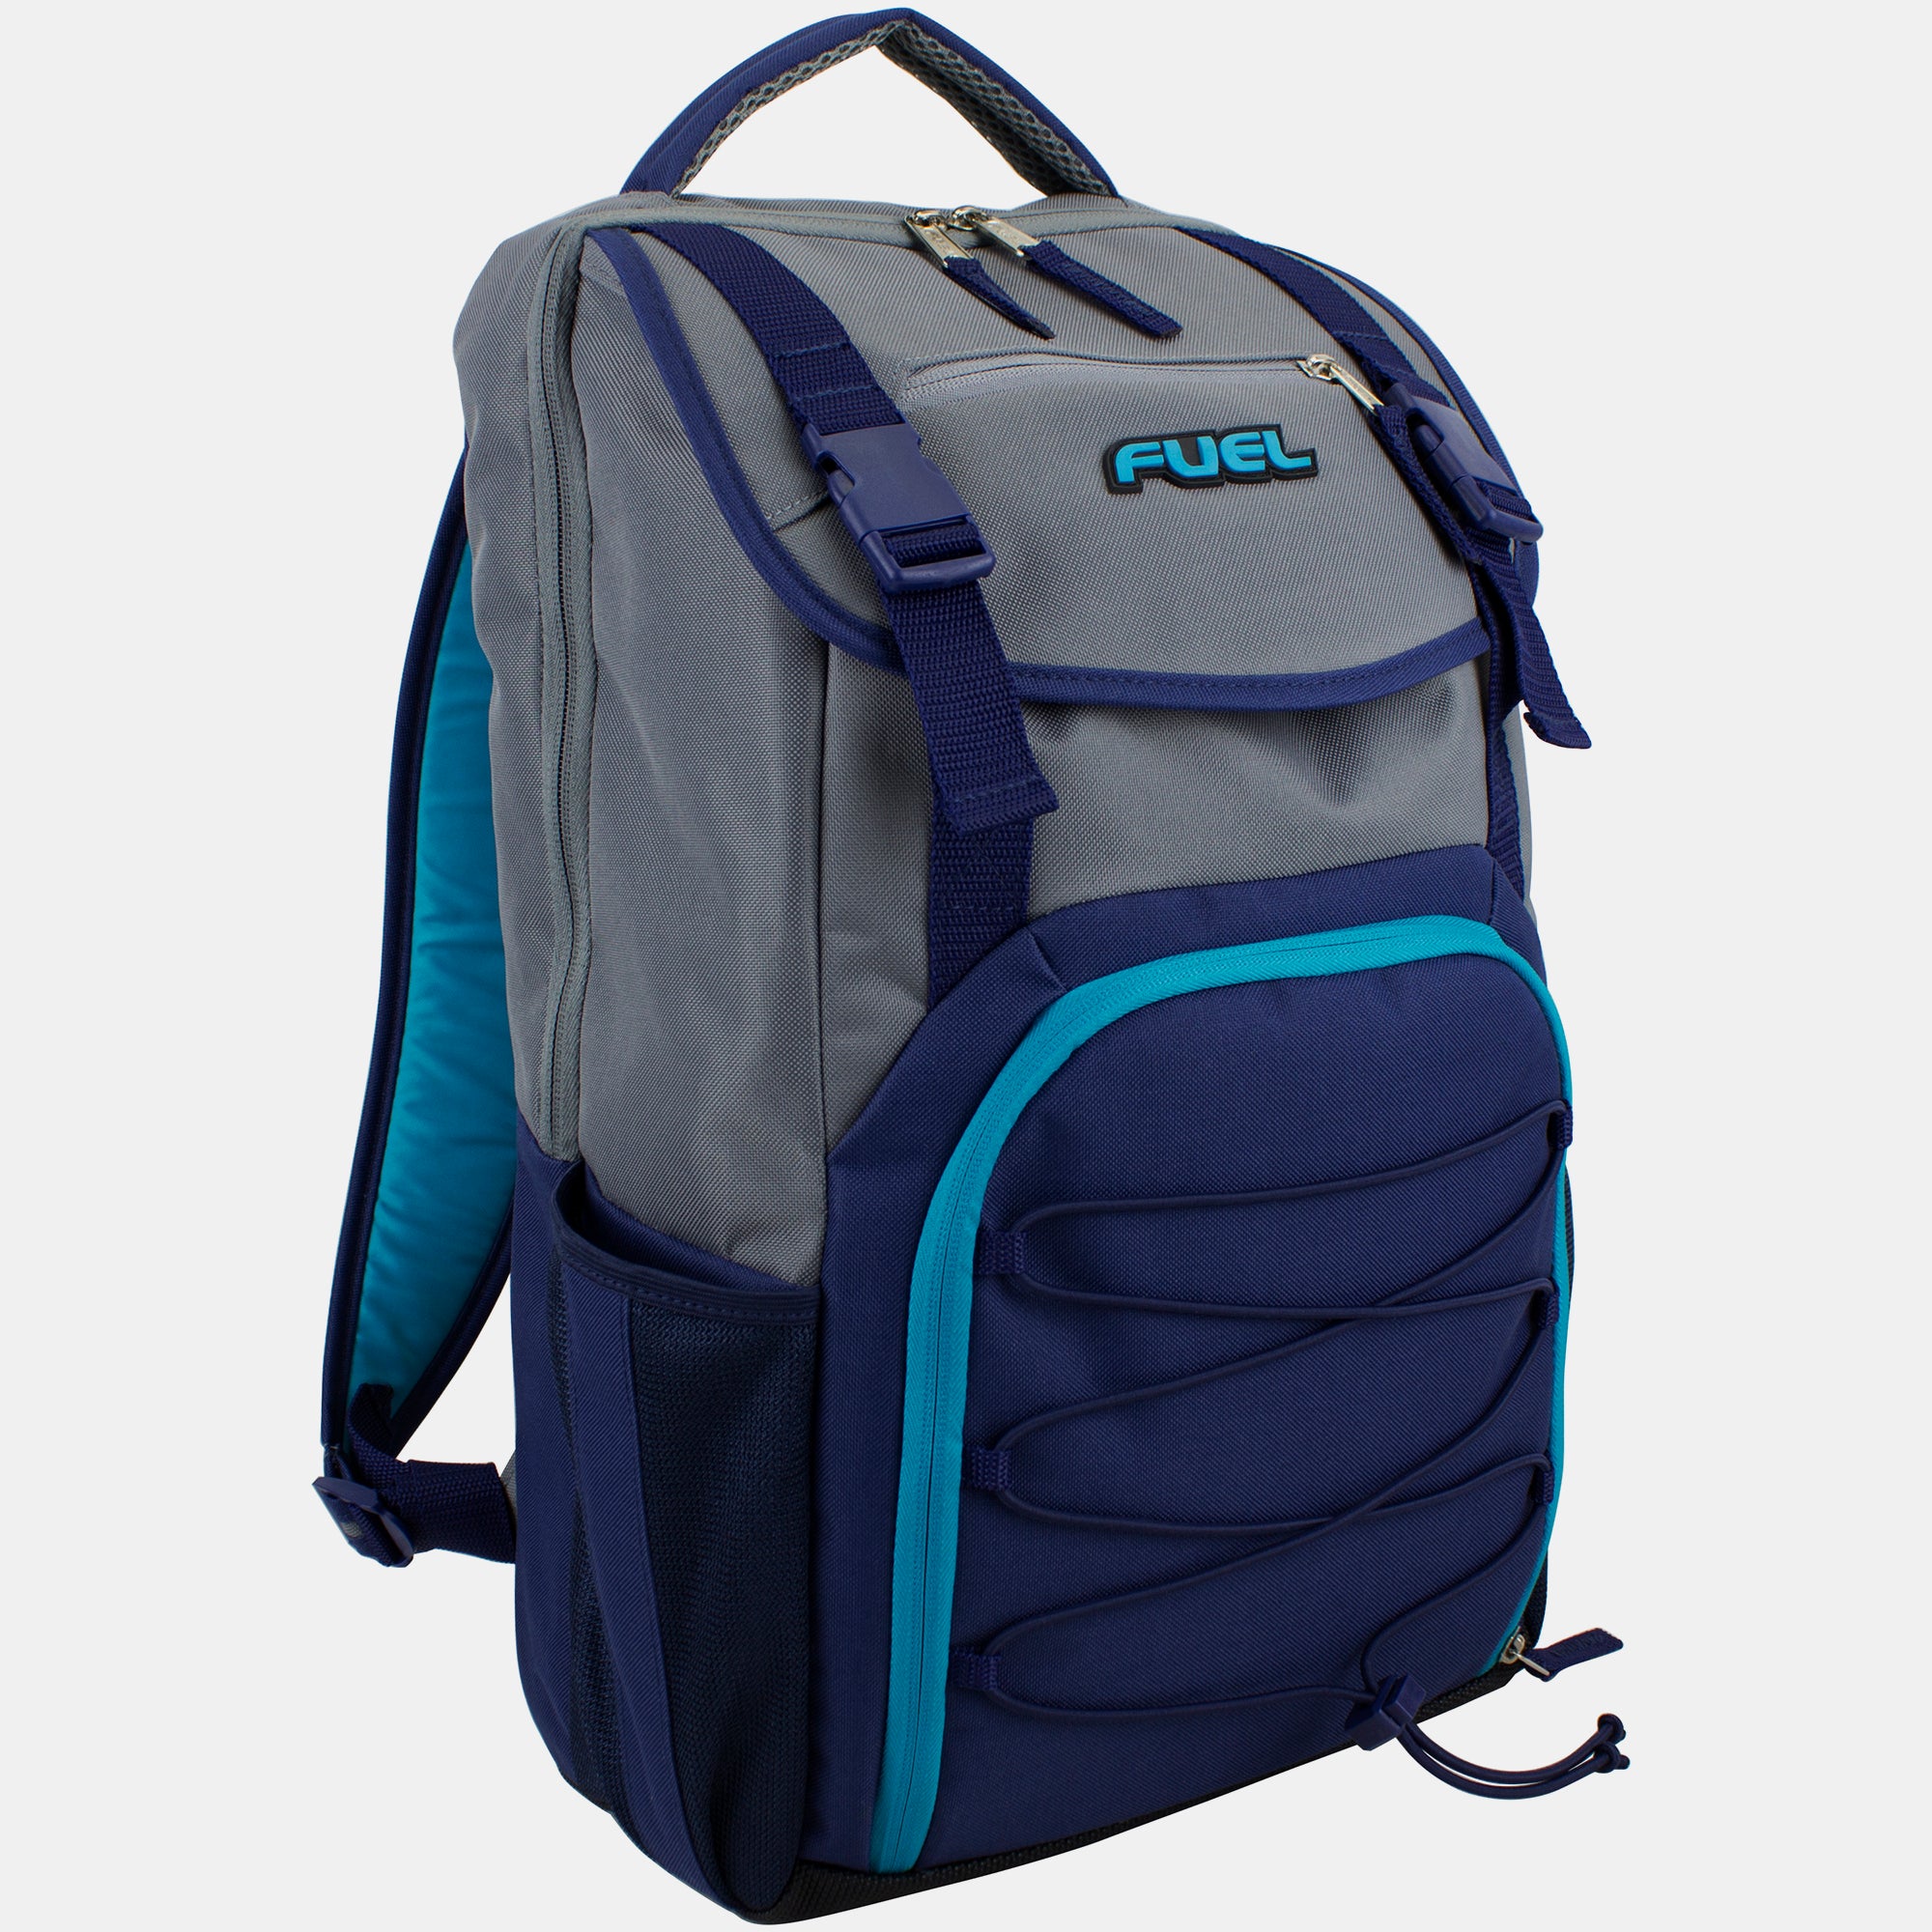 Fuel Triumph Backpack